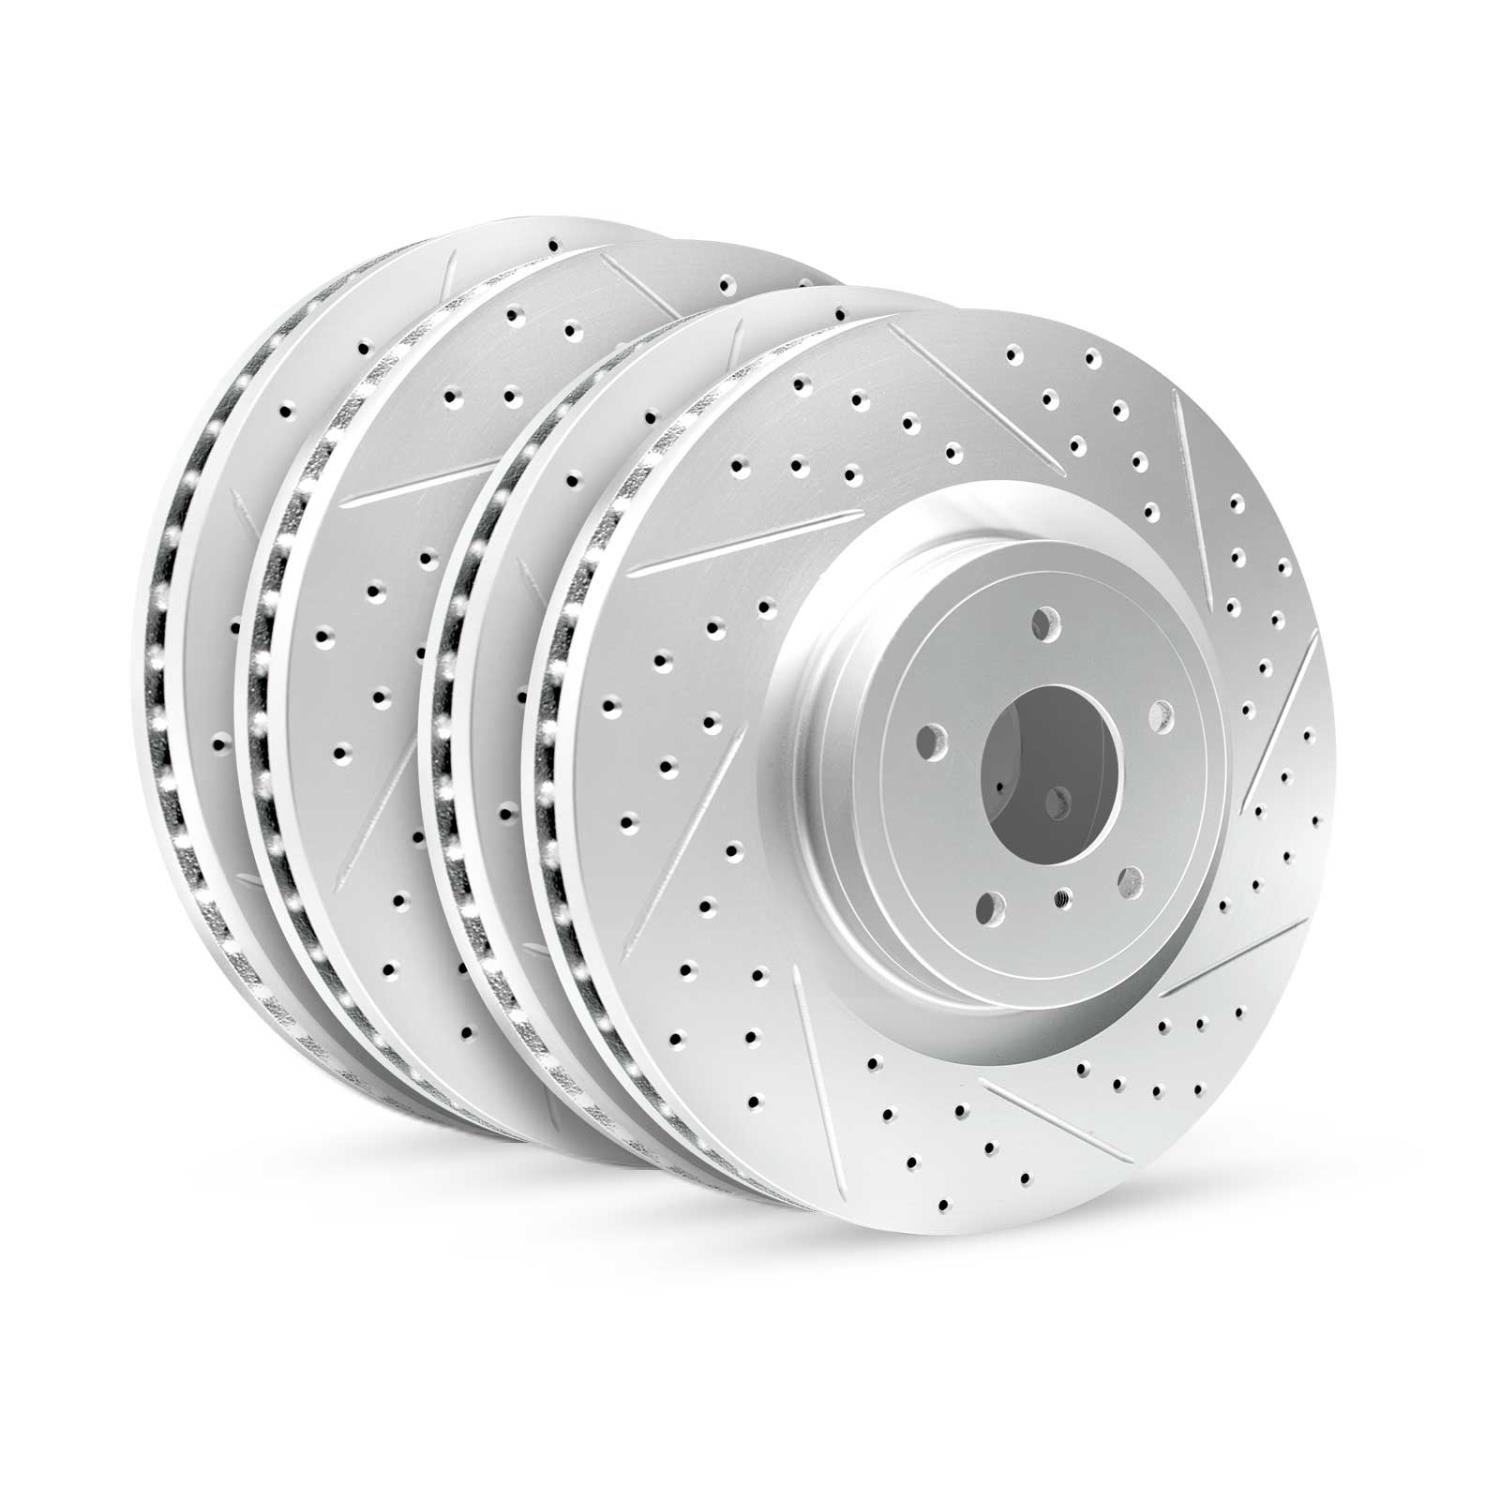 GEO-Carbon Drilled/Slotted Rotors, 2012-2018 Lexus/Toyota/Scion, Position: Front/Rear